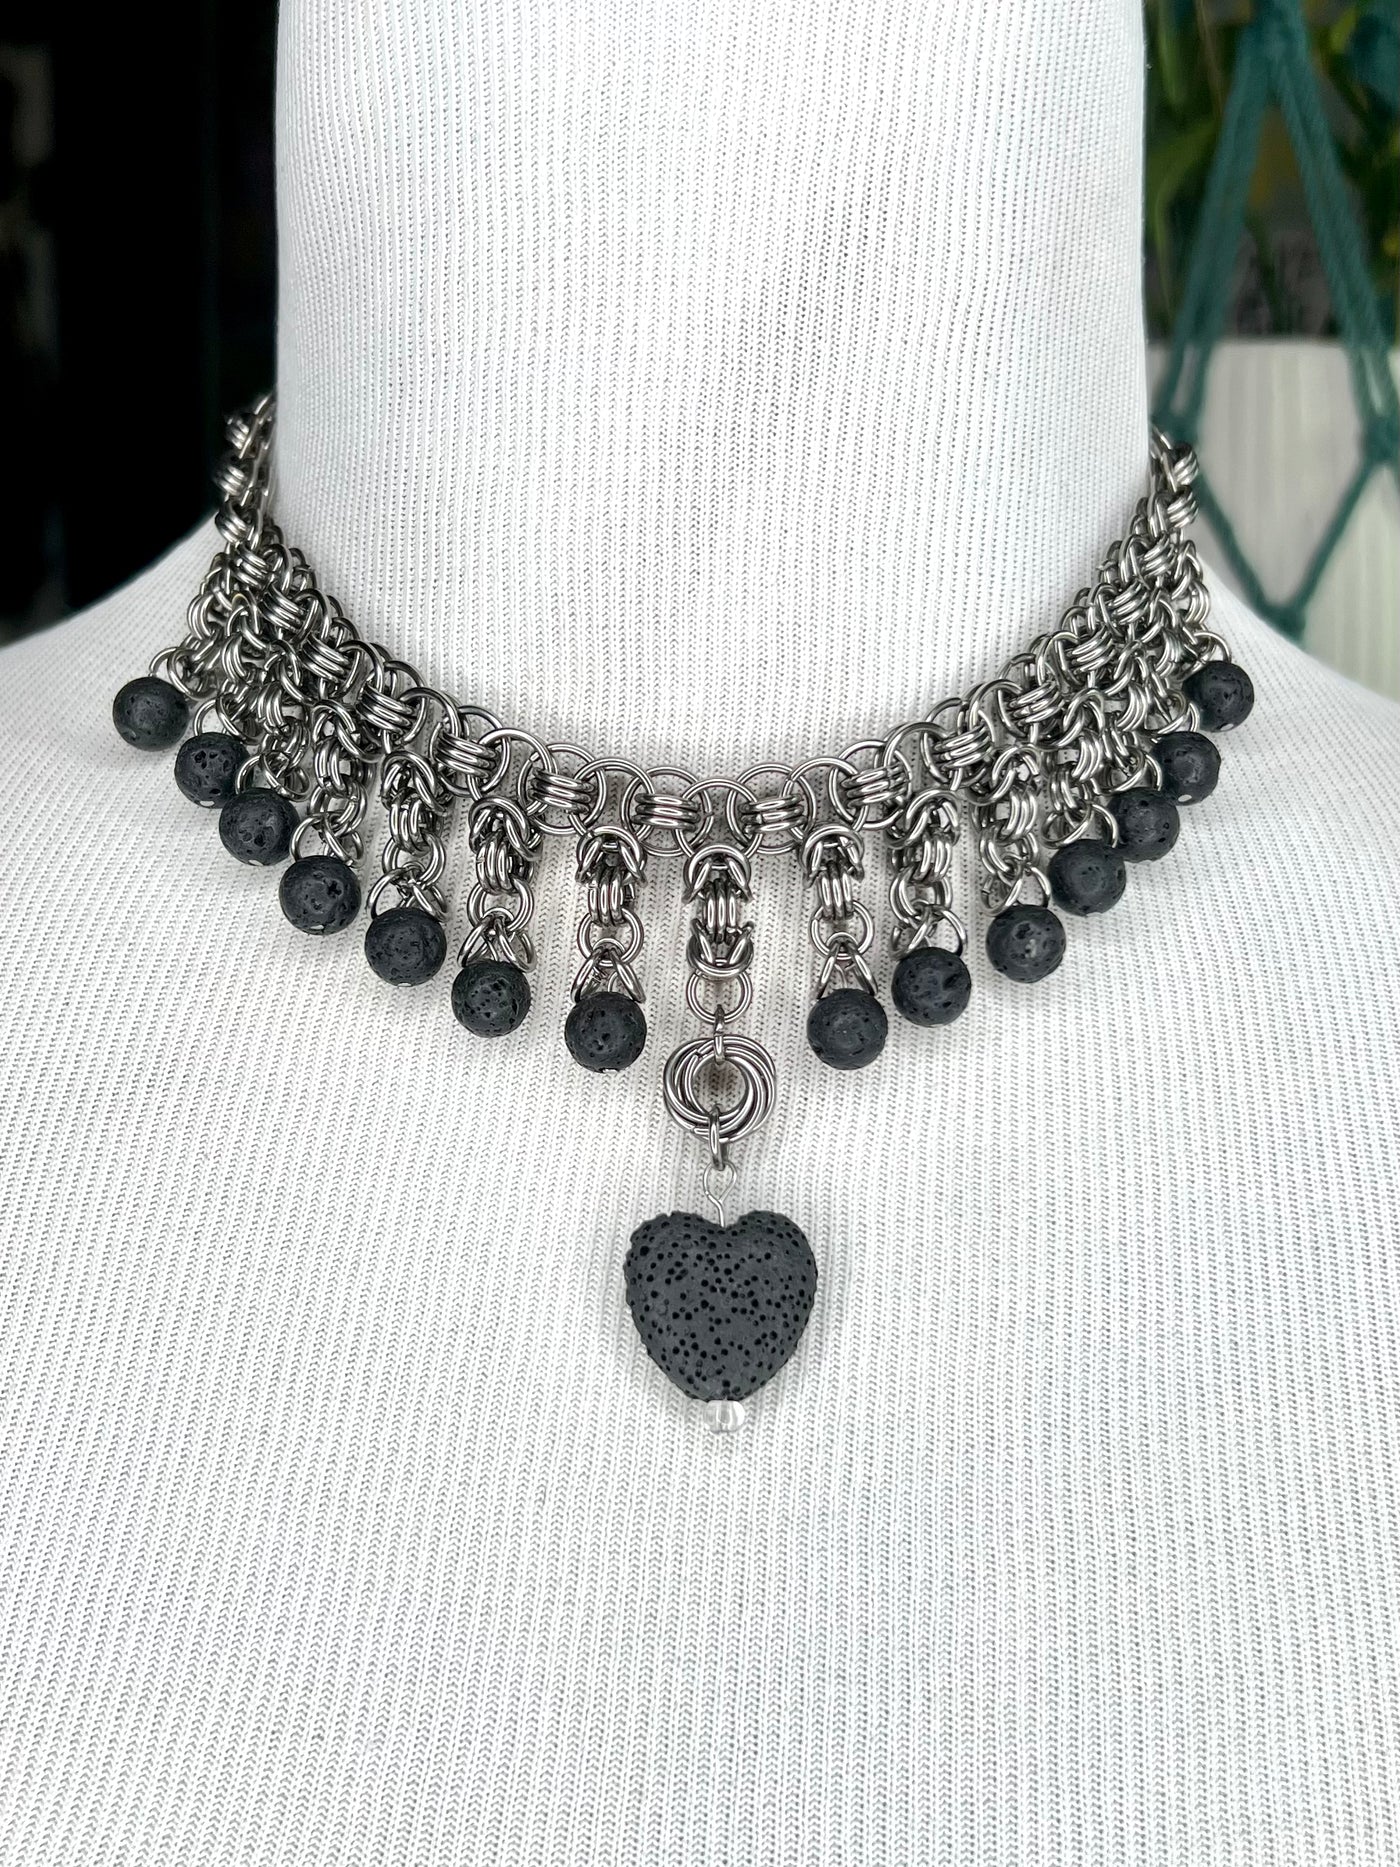 Heart of Stone Necklace